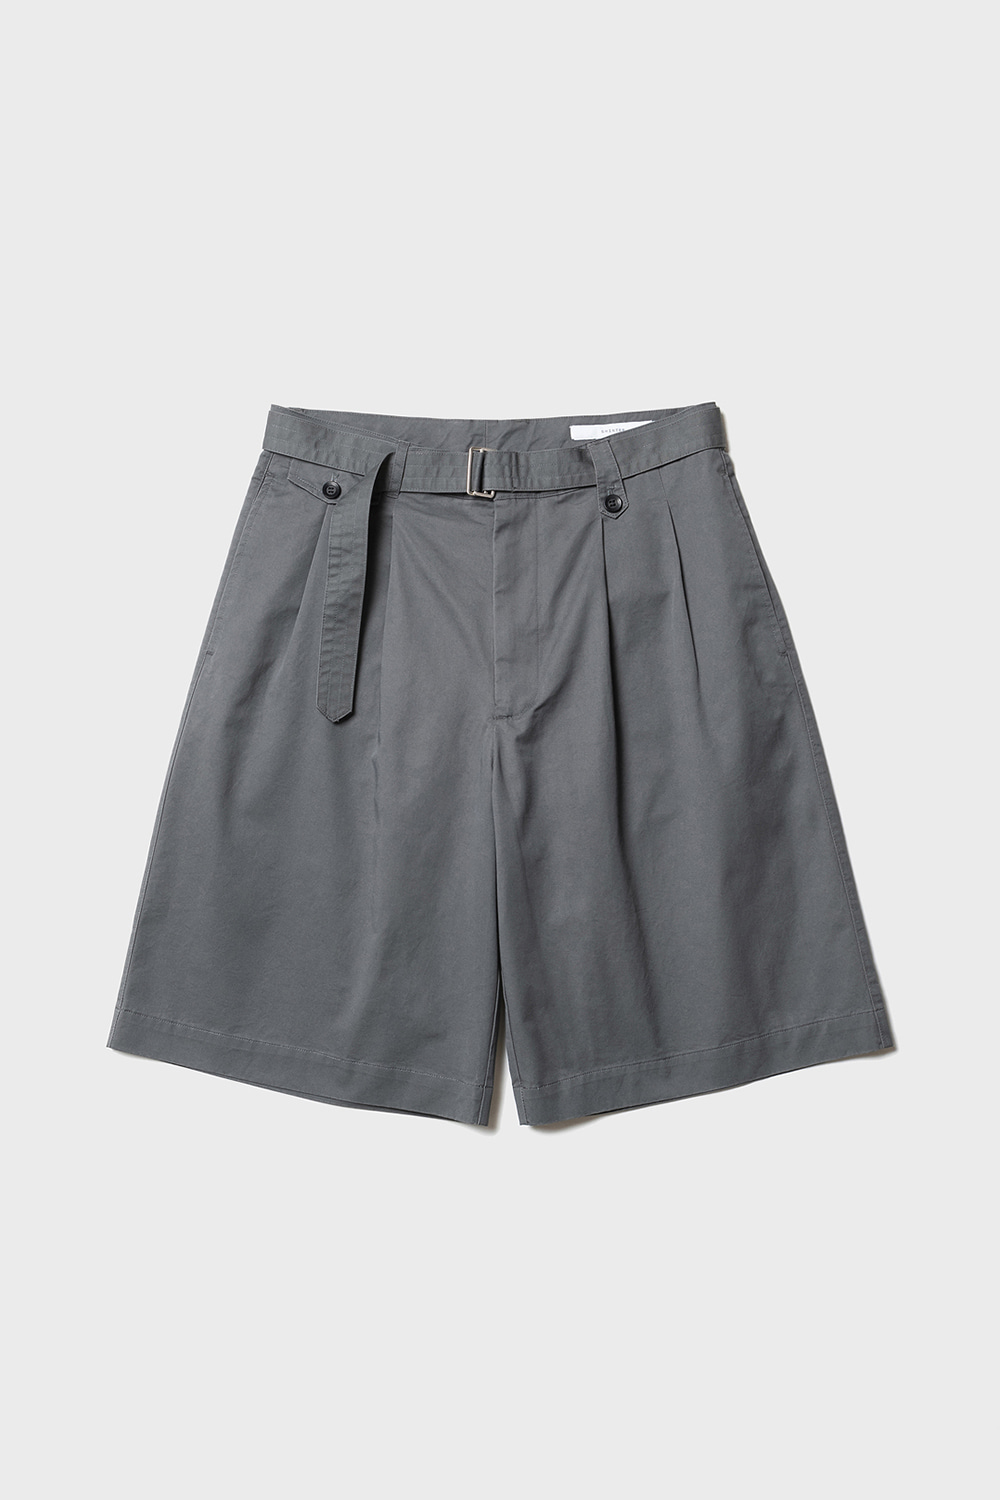 BELTED WIDE SHORTS (GREY)